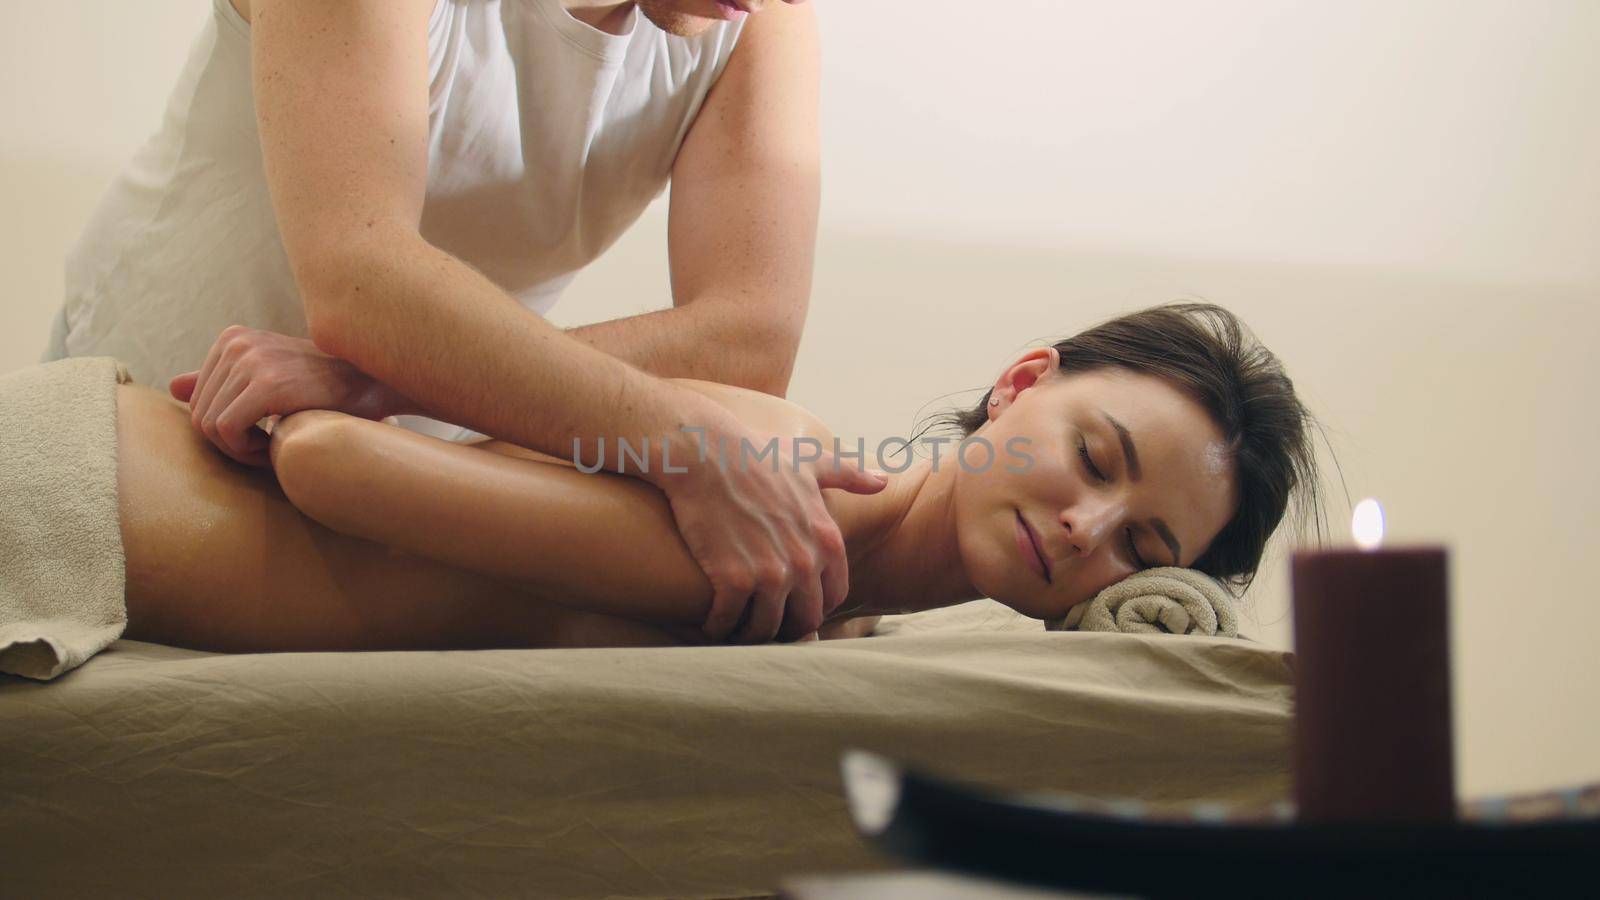 Classical massage in the spa salon - relaxation therapy for attractive young model by Studia72